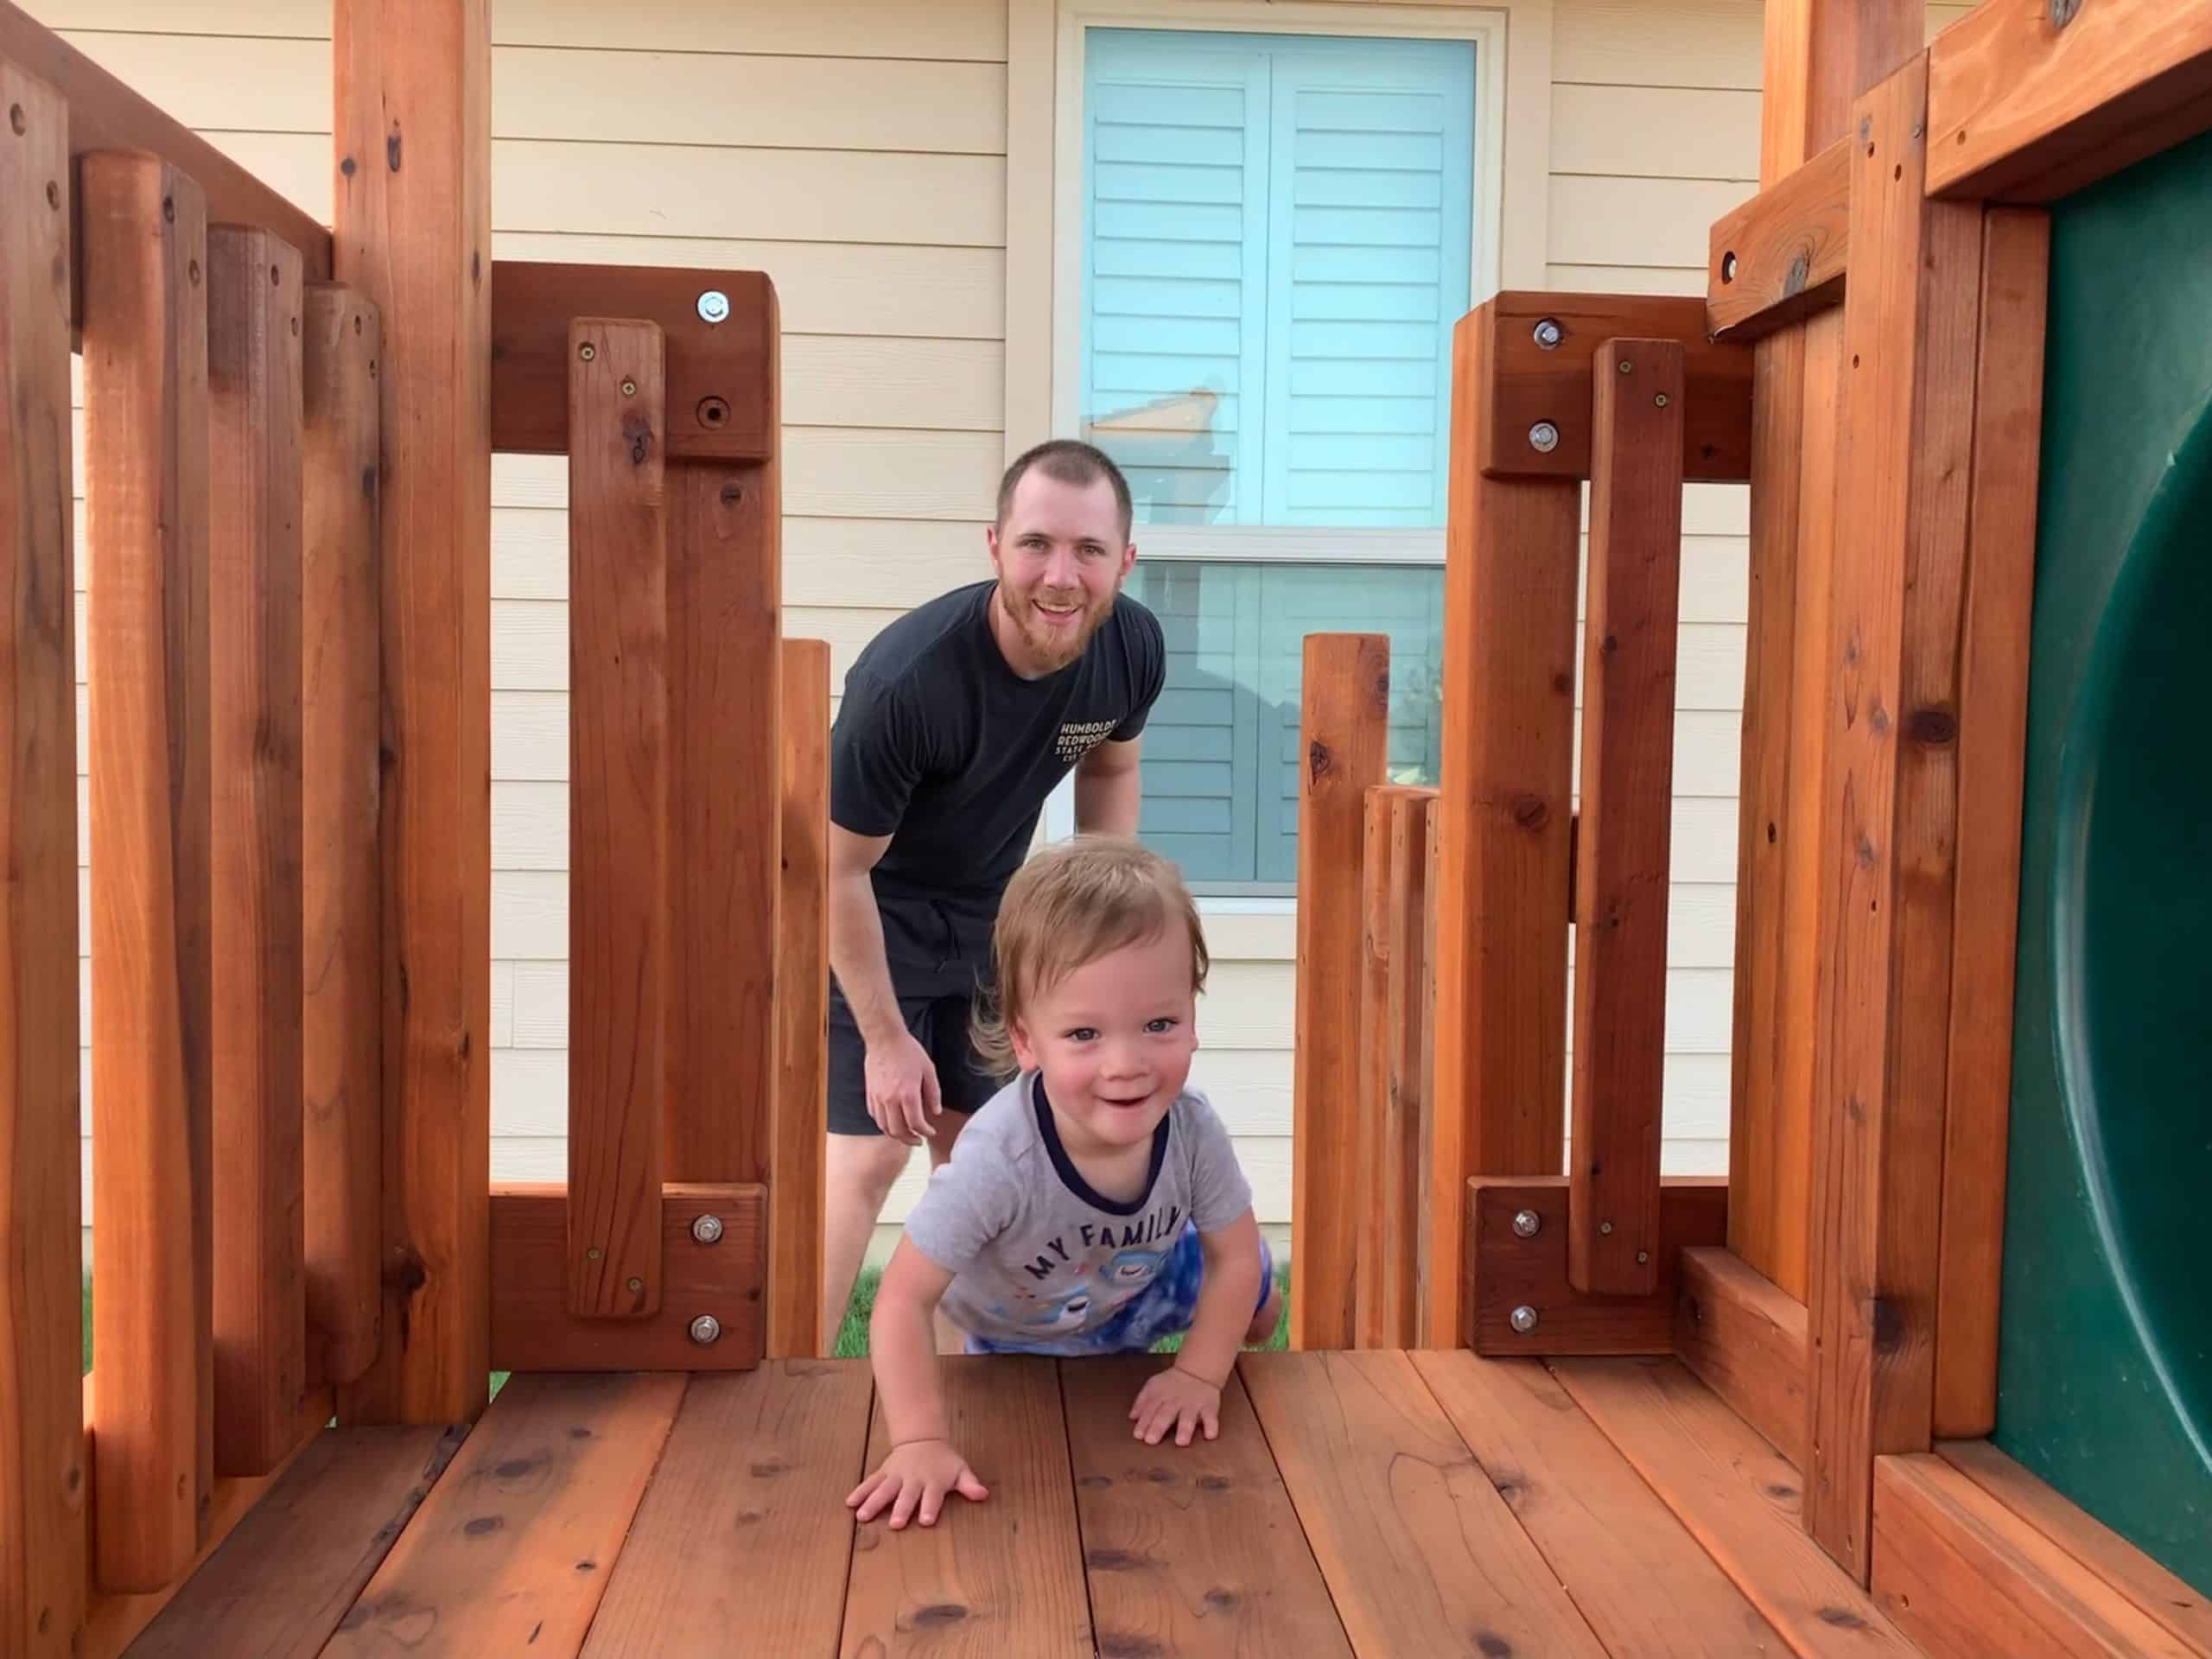 McKinney, Texas, dad and son playing on backyard fun factory redwood playset, Flower Mound - play set outdoor